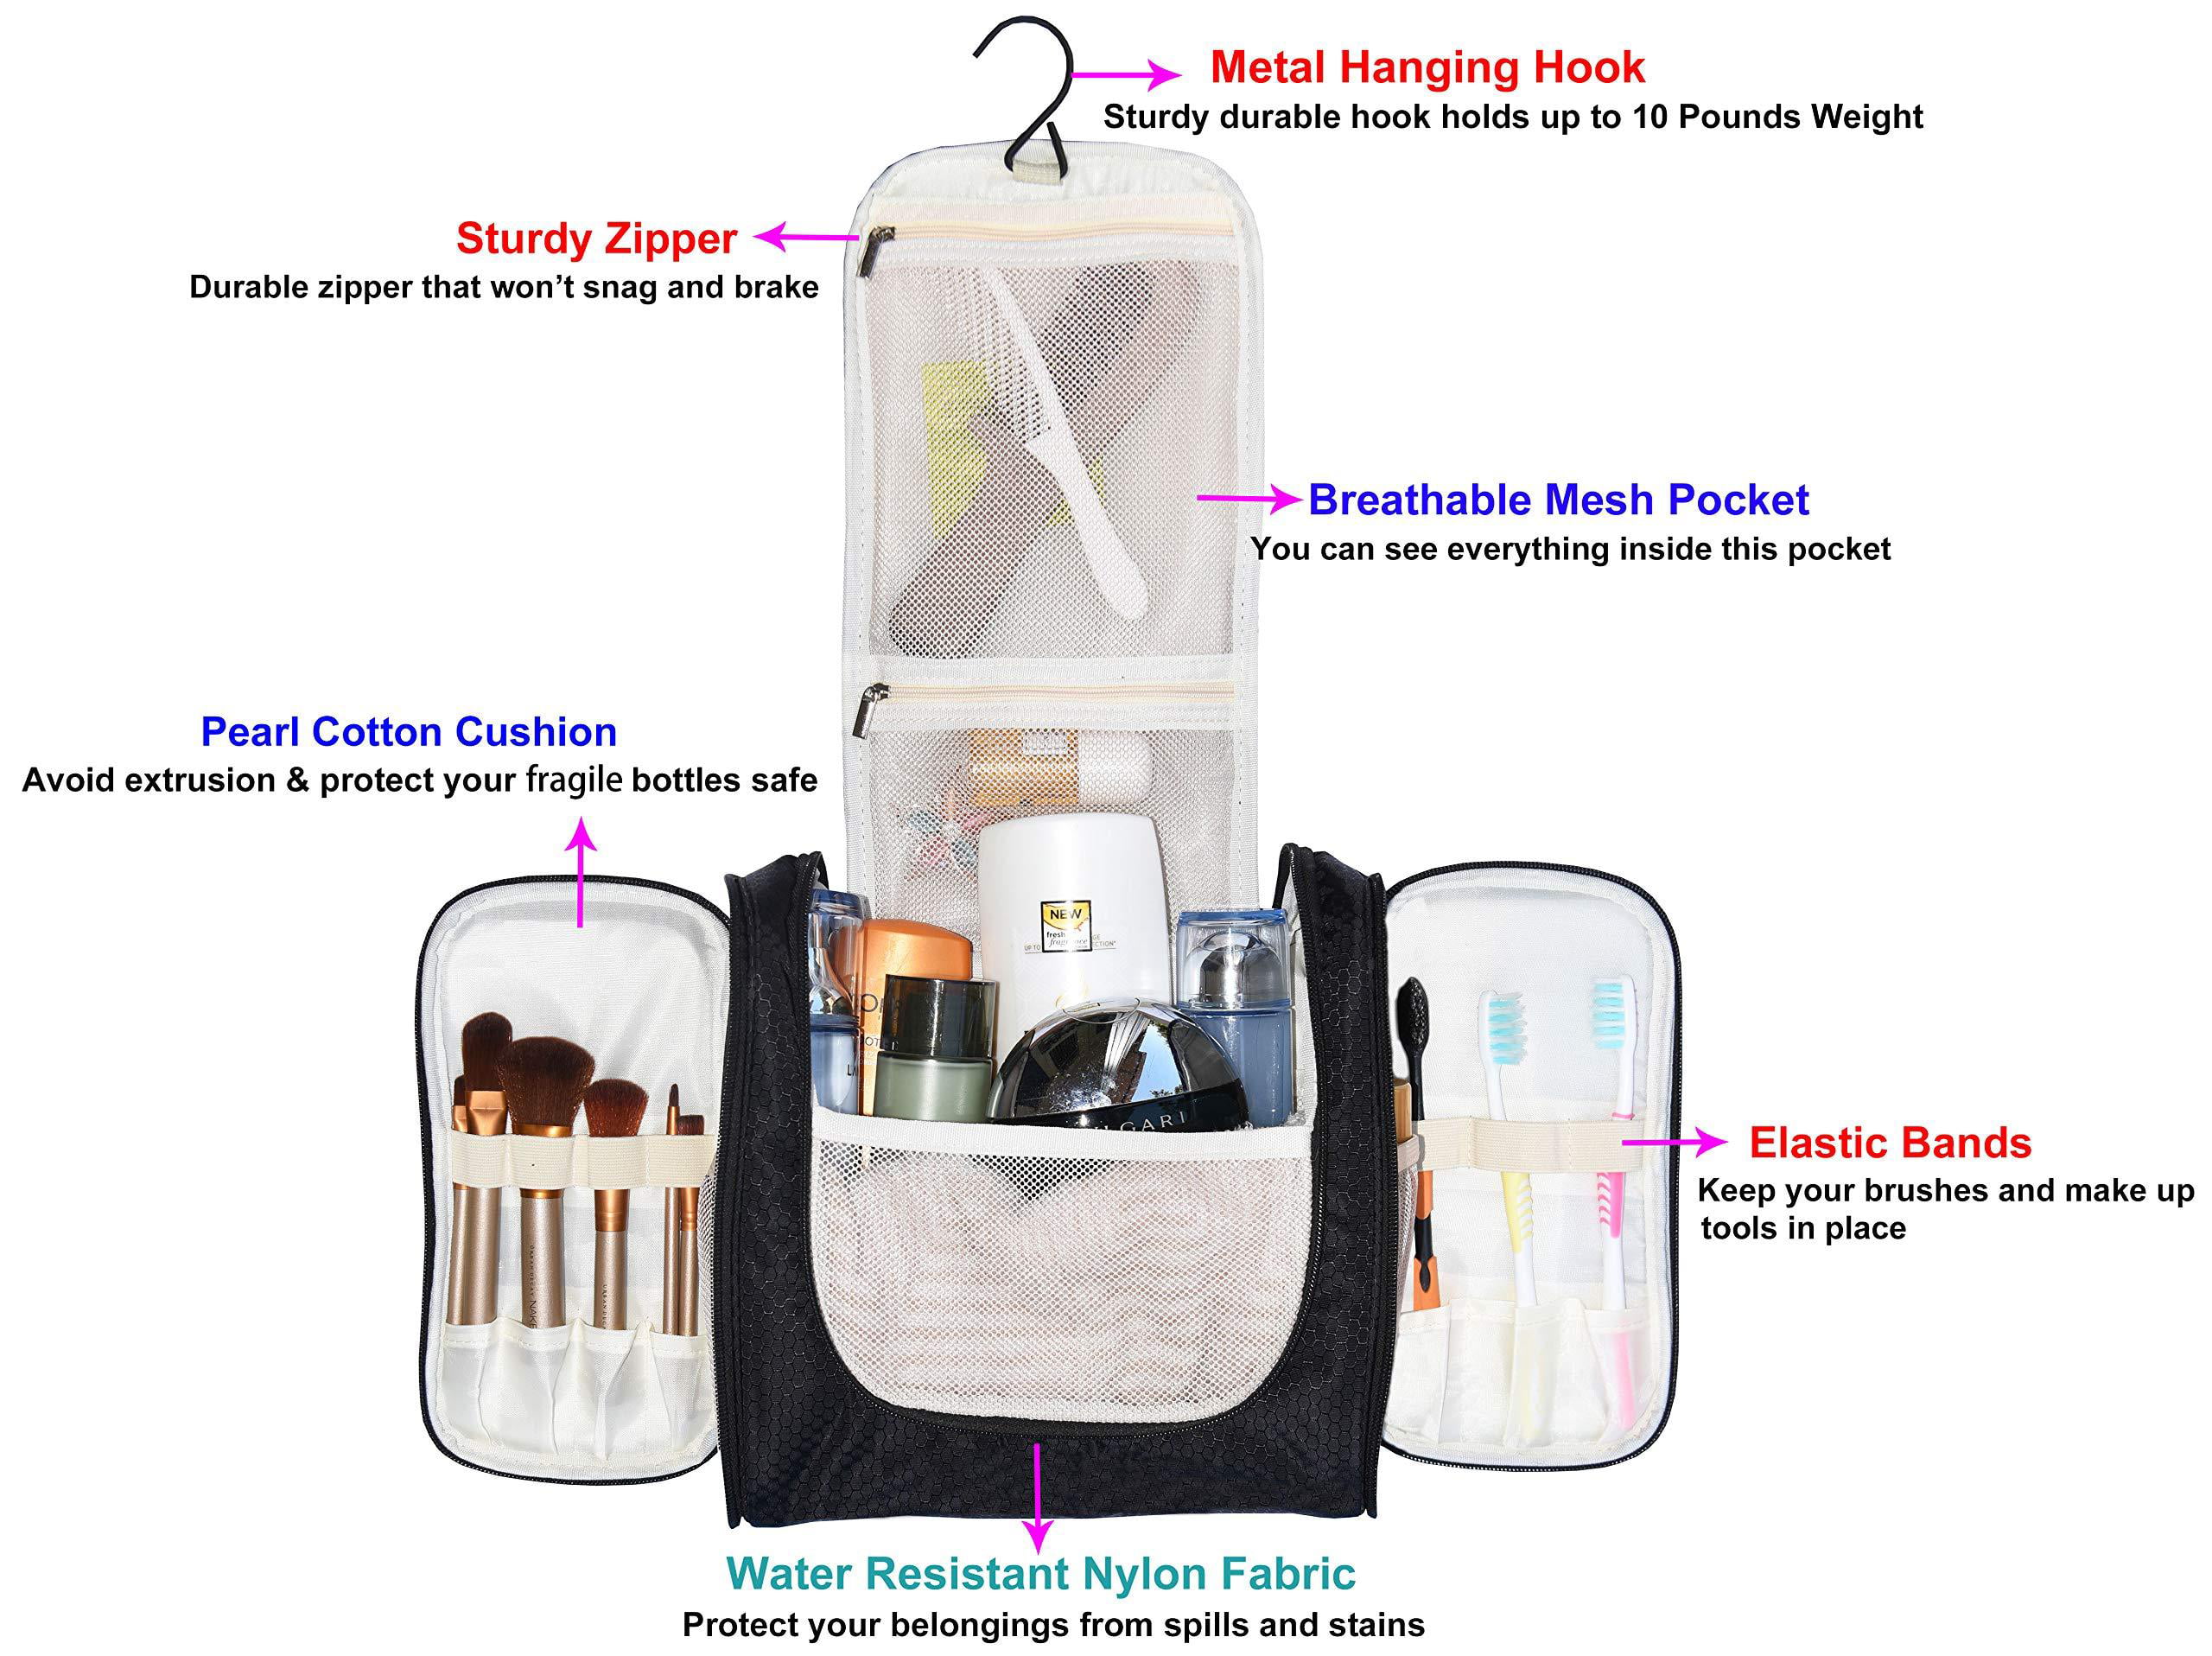 Buy Ghime Travel Toiletry Bag with Hanging Hook, Large Cosmetic